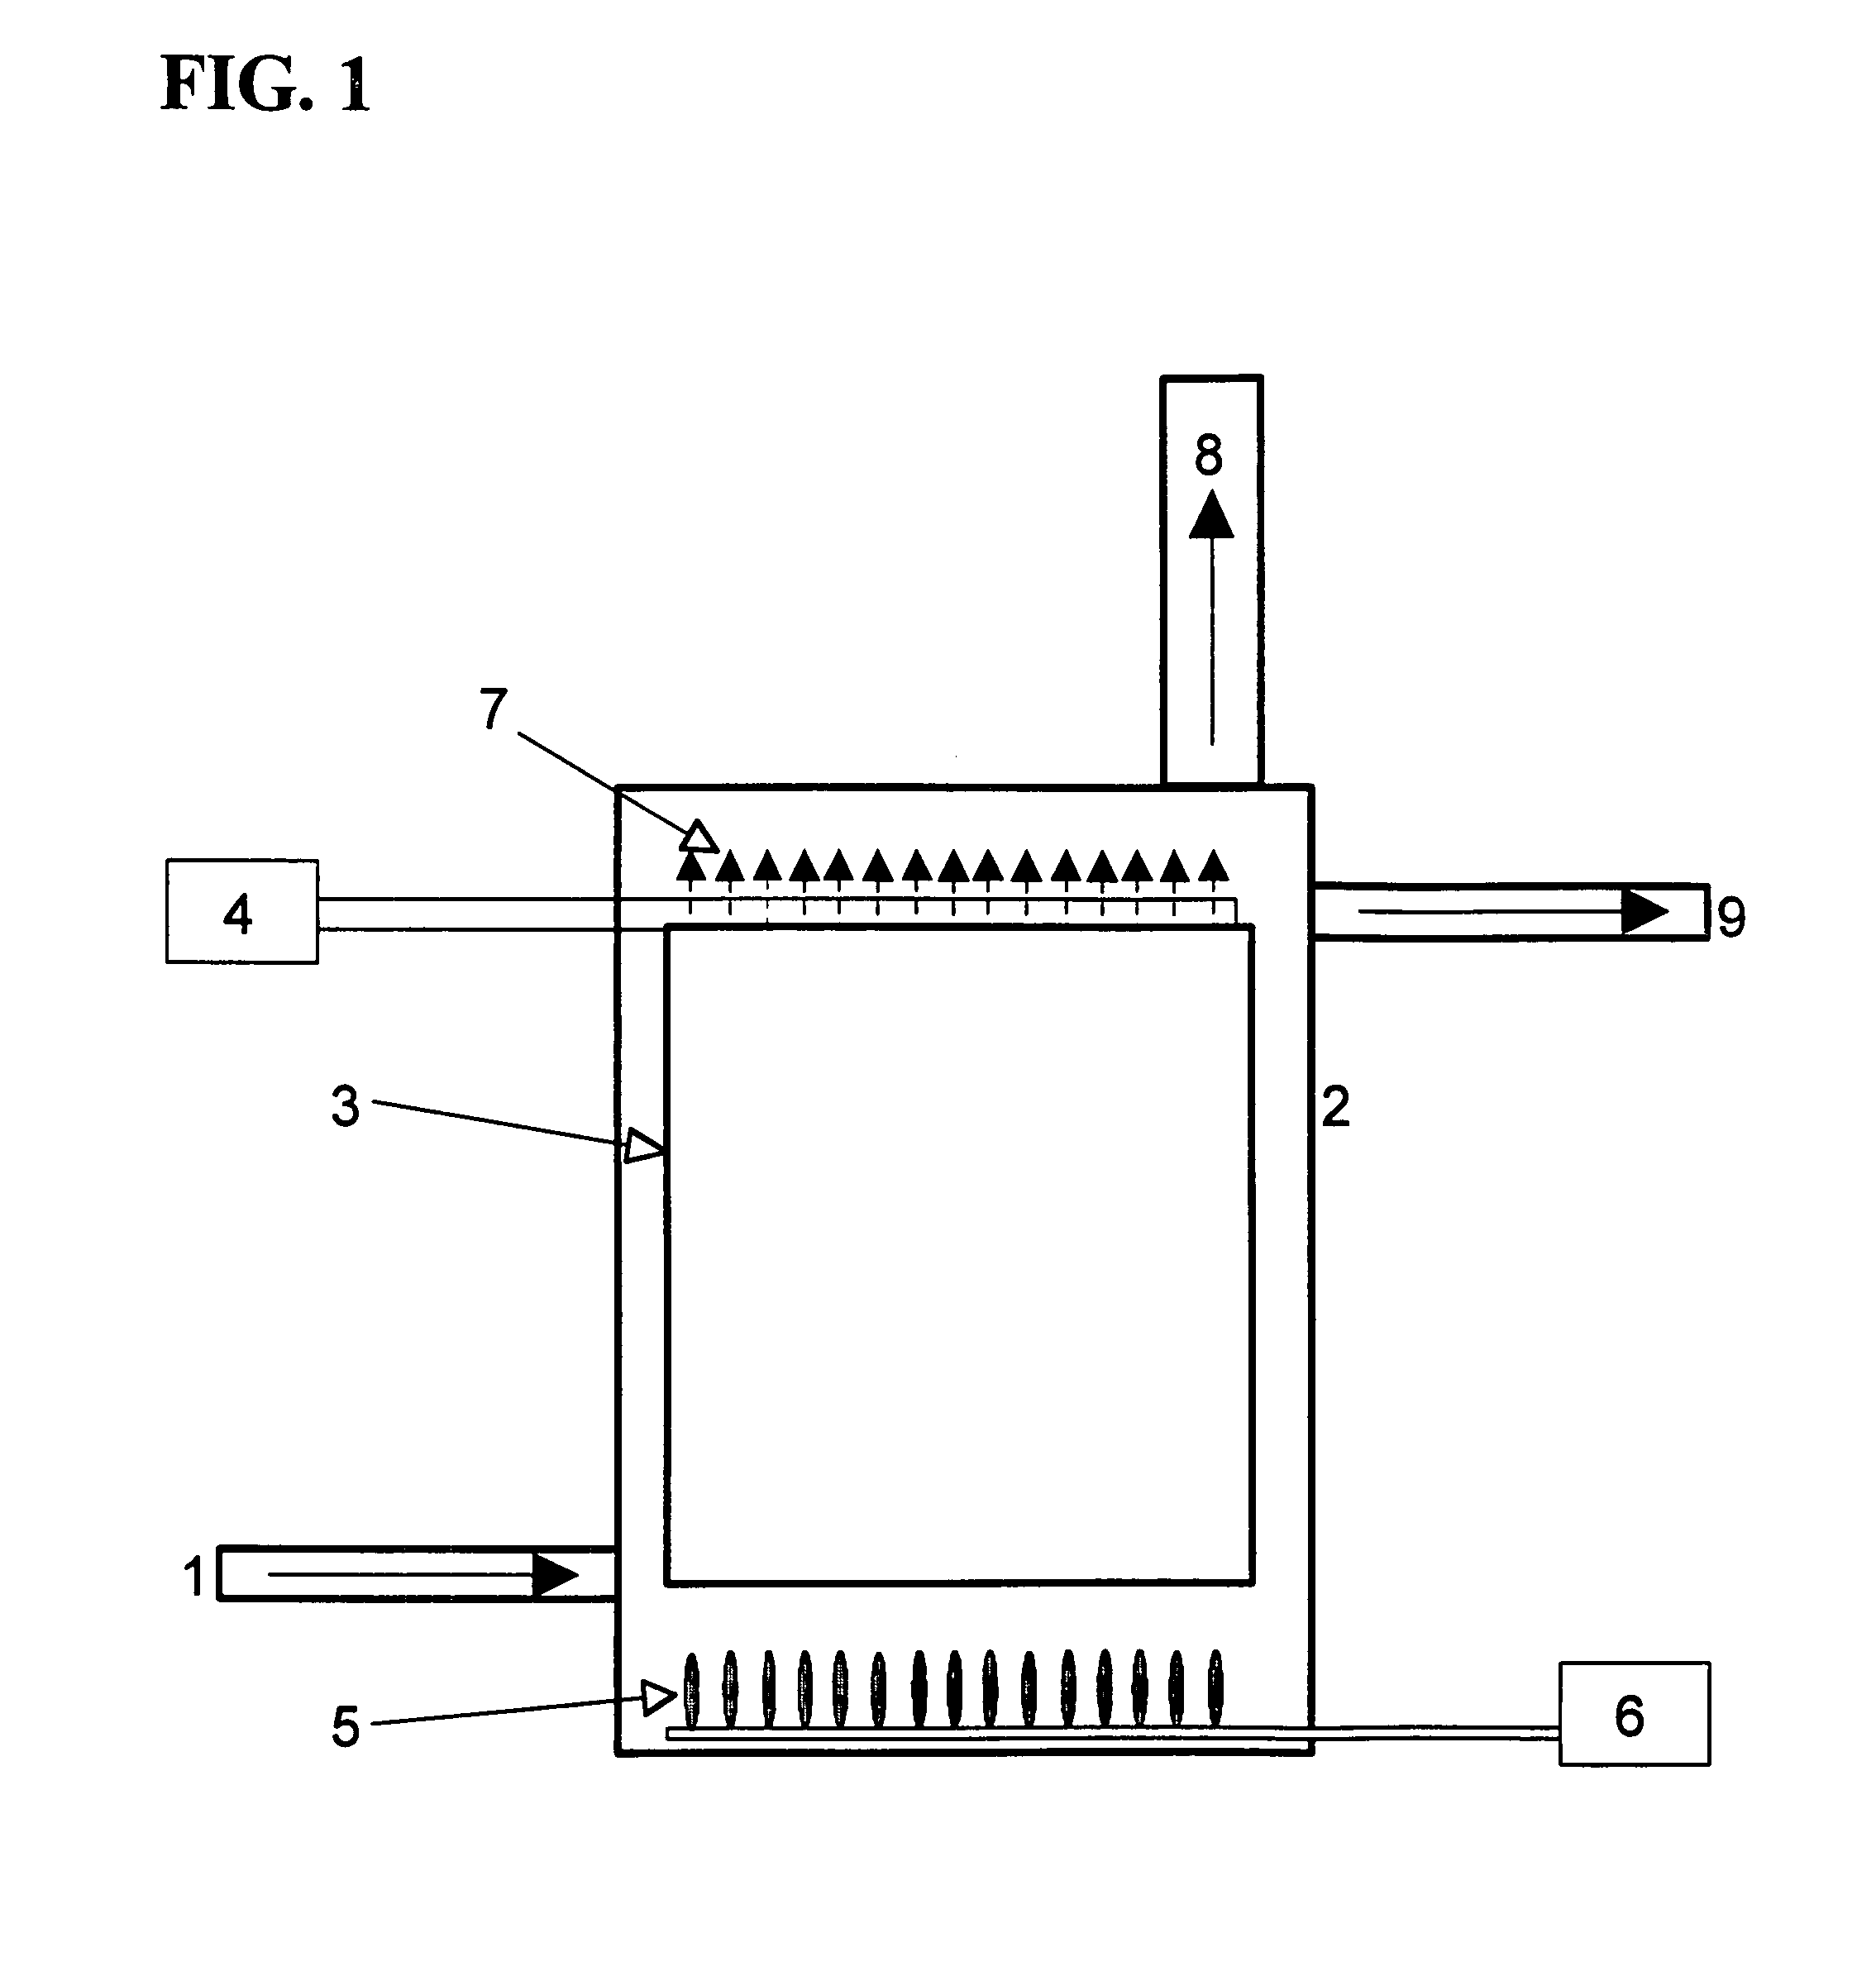 Method and system for removal of ammonia from wastewater by electrolysis